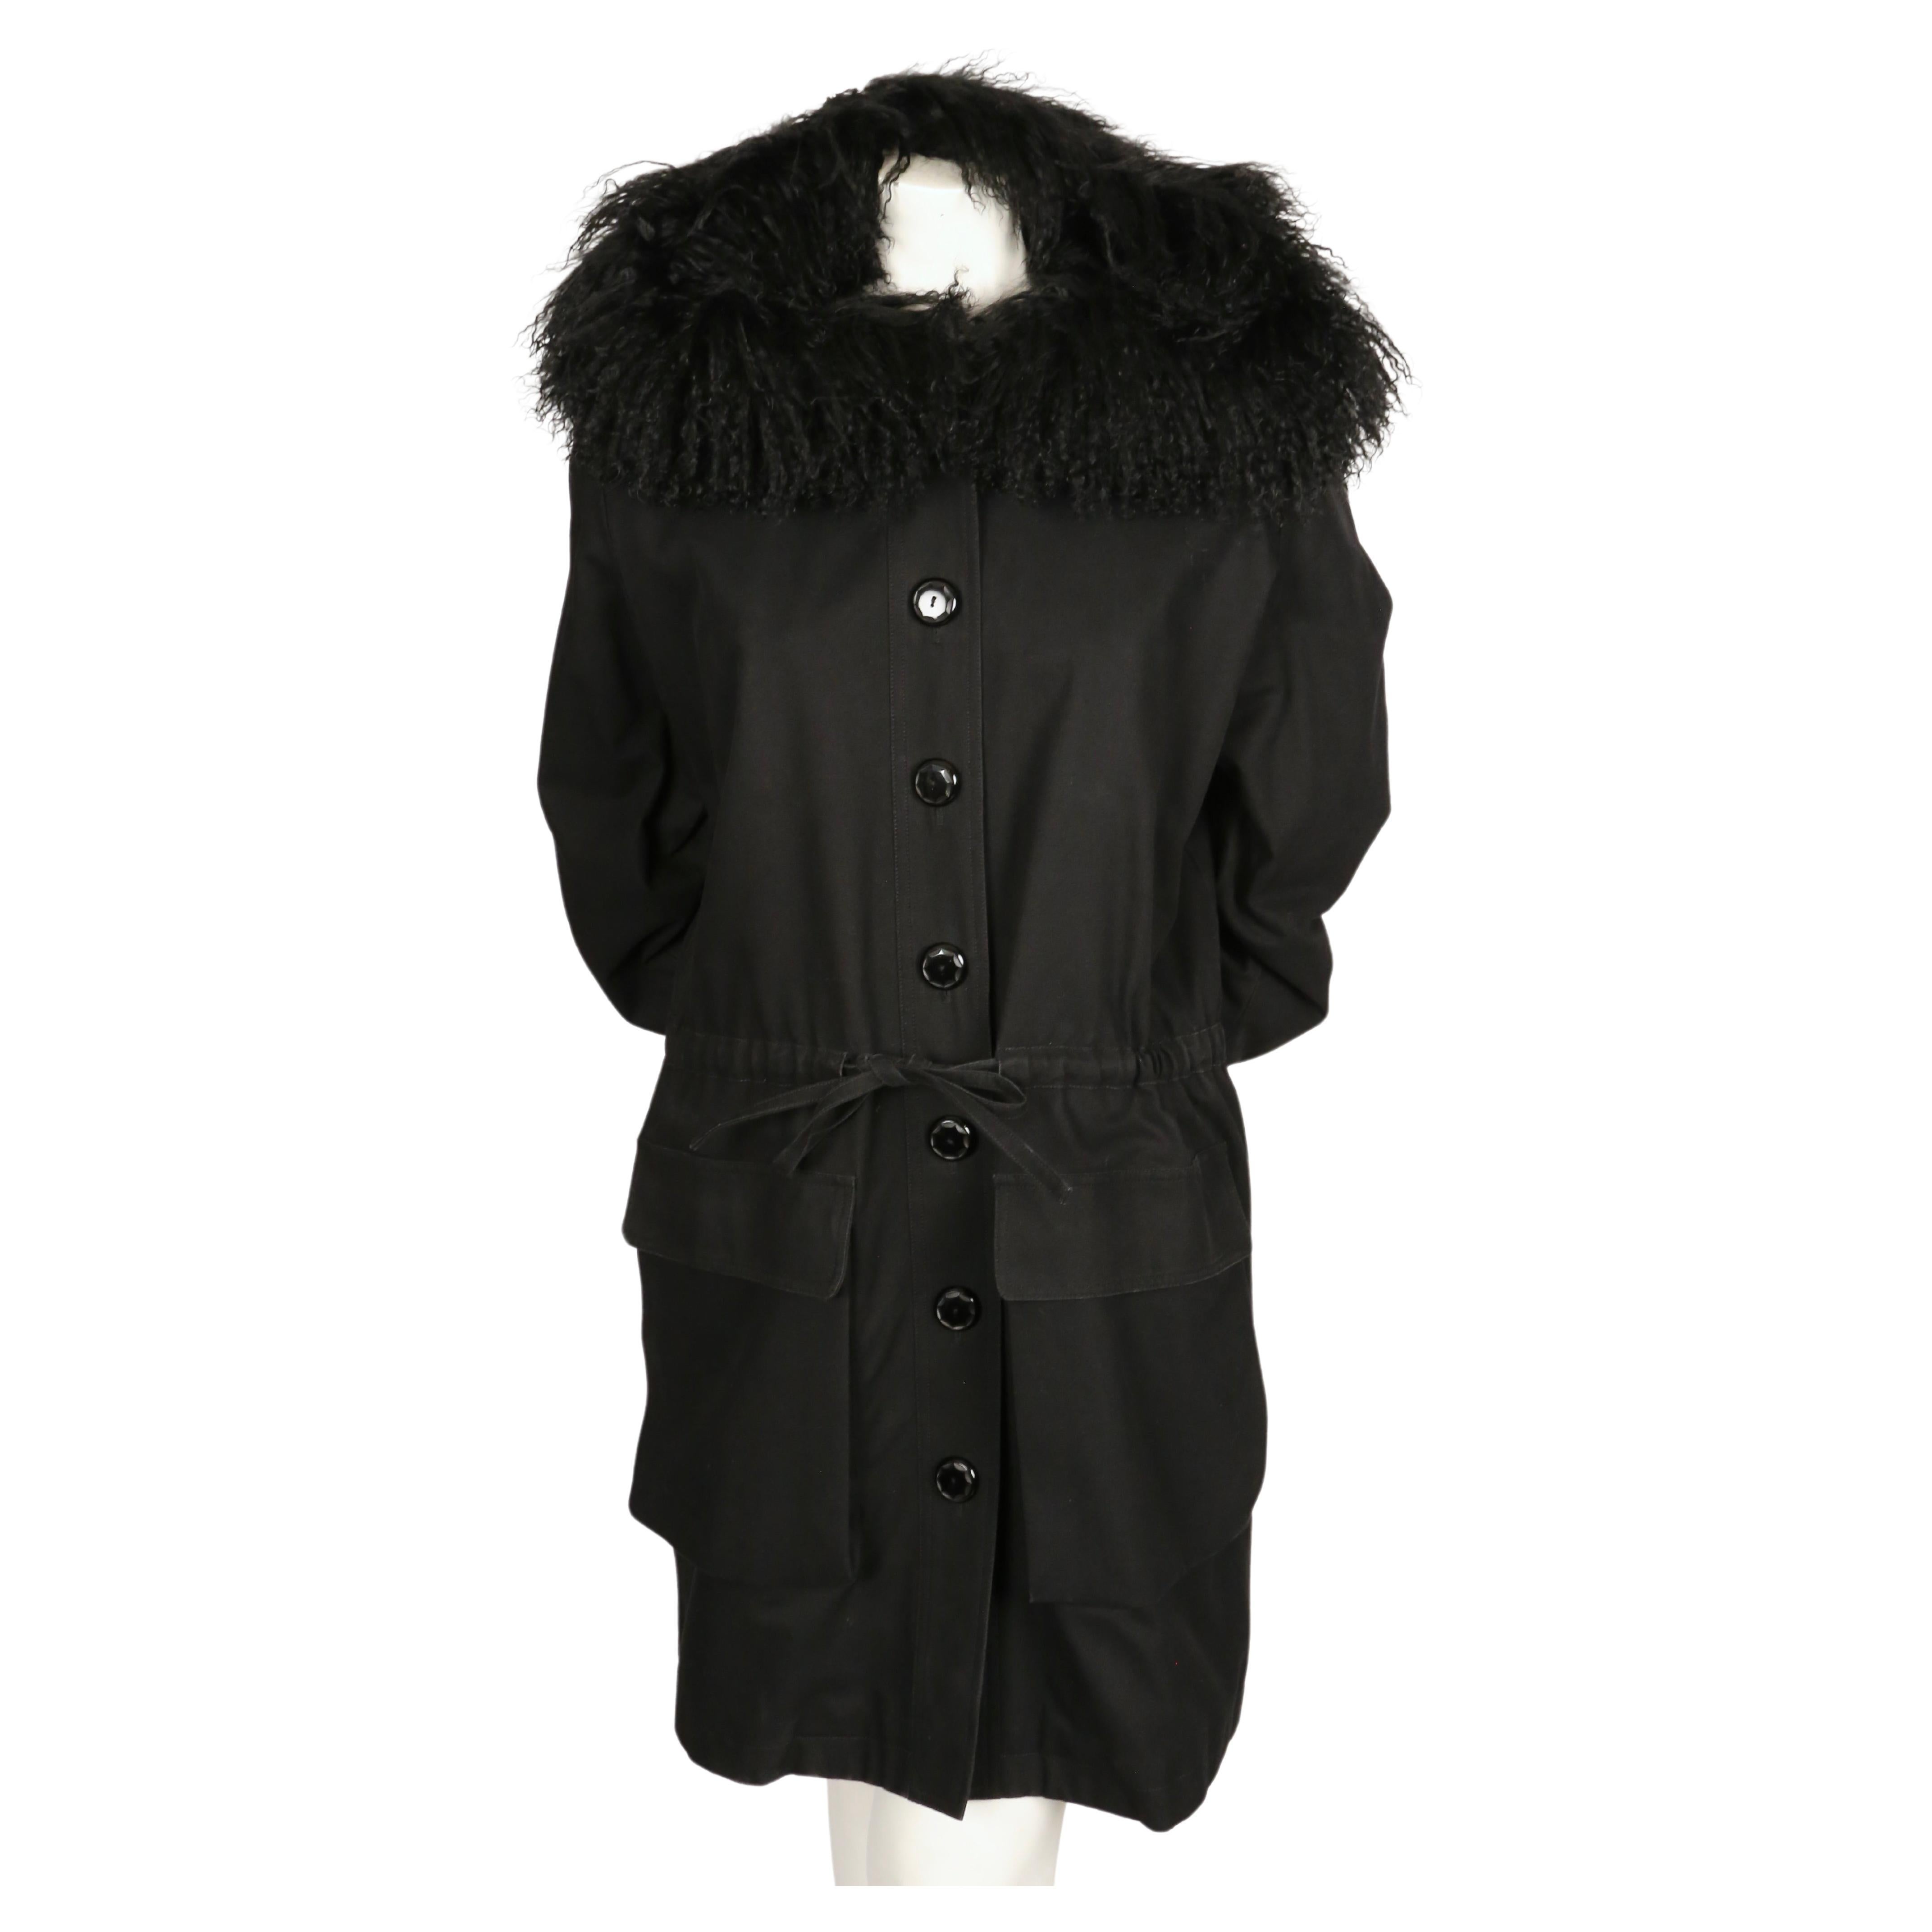 Very rare black cotton coat with oversized curly lamb fur hood, 3-D pockets, drawstring waist and quilted lining designed by Yves Saint Laurent dating to the 1980's. No size is indicated however this best fist a FR 38 to 42. Approximate